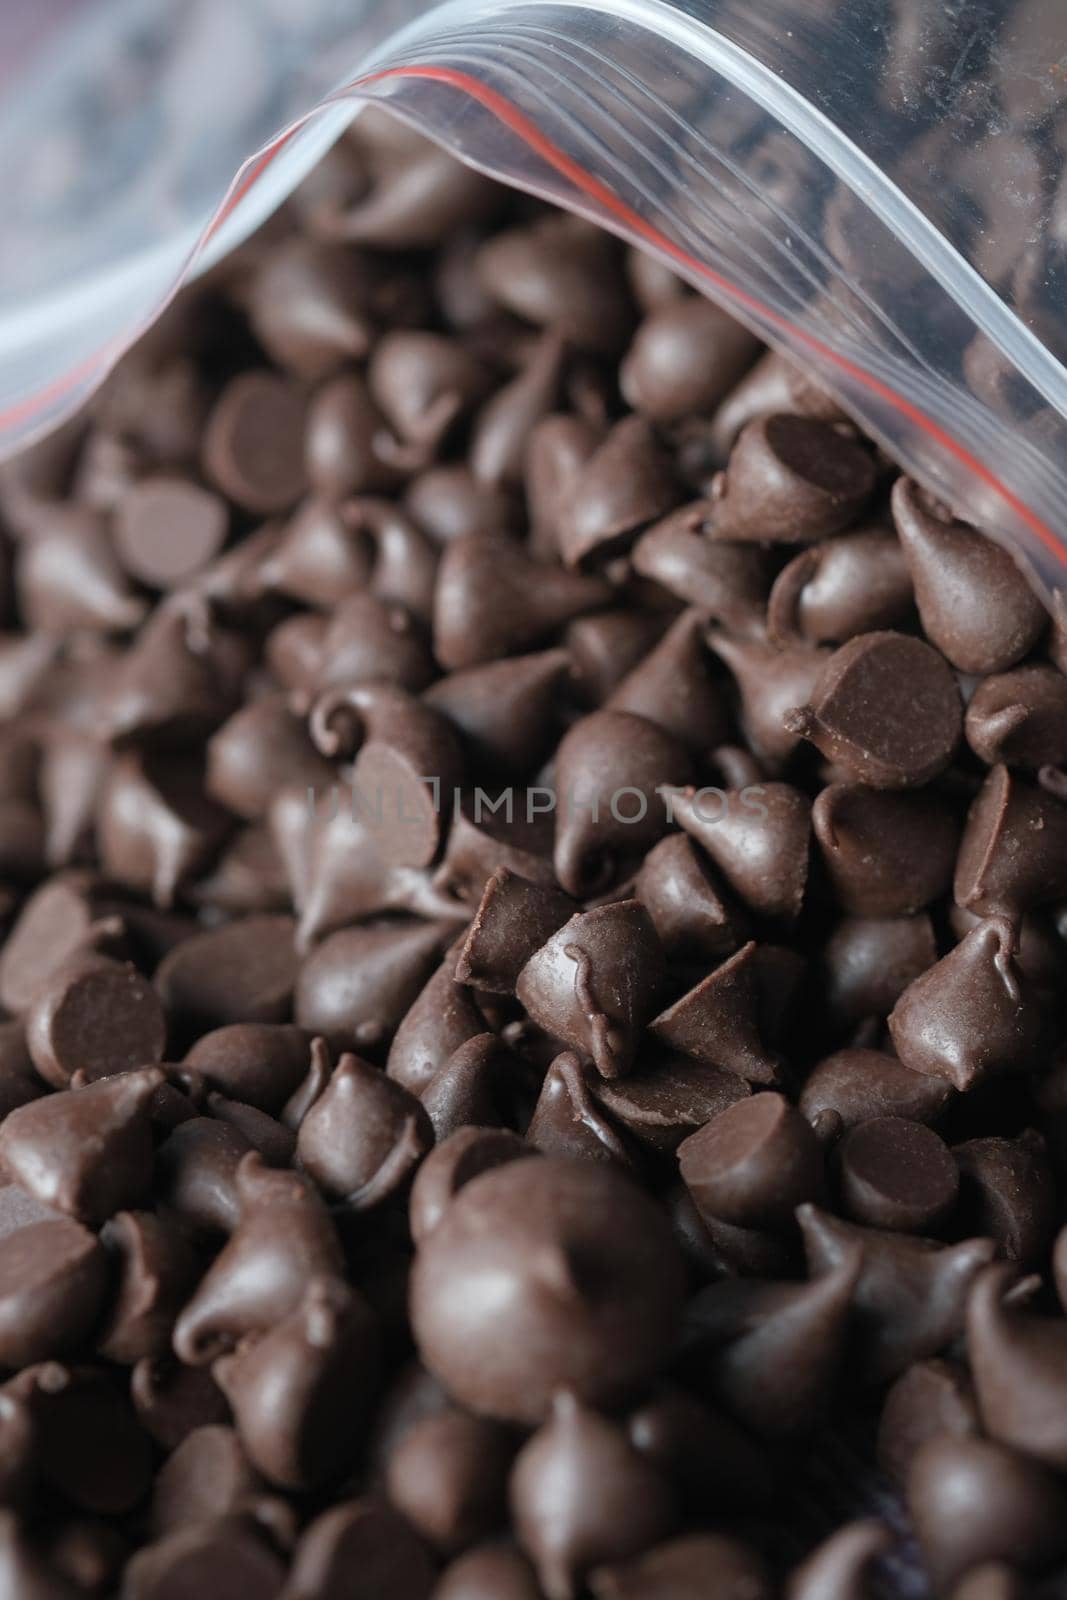 Chocolate chips spilling from a plastic packet, by towfiq007